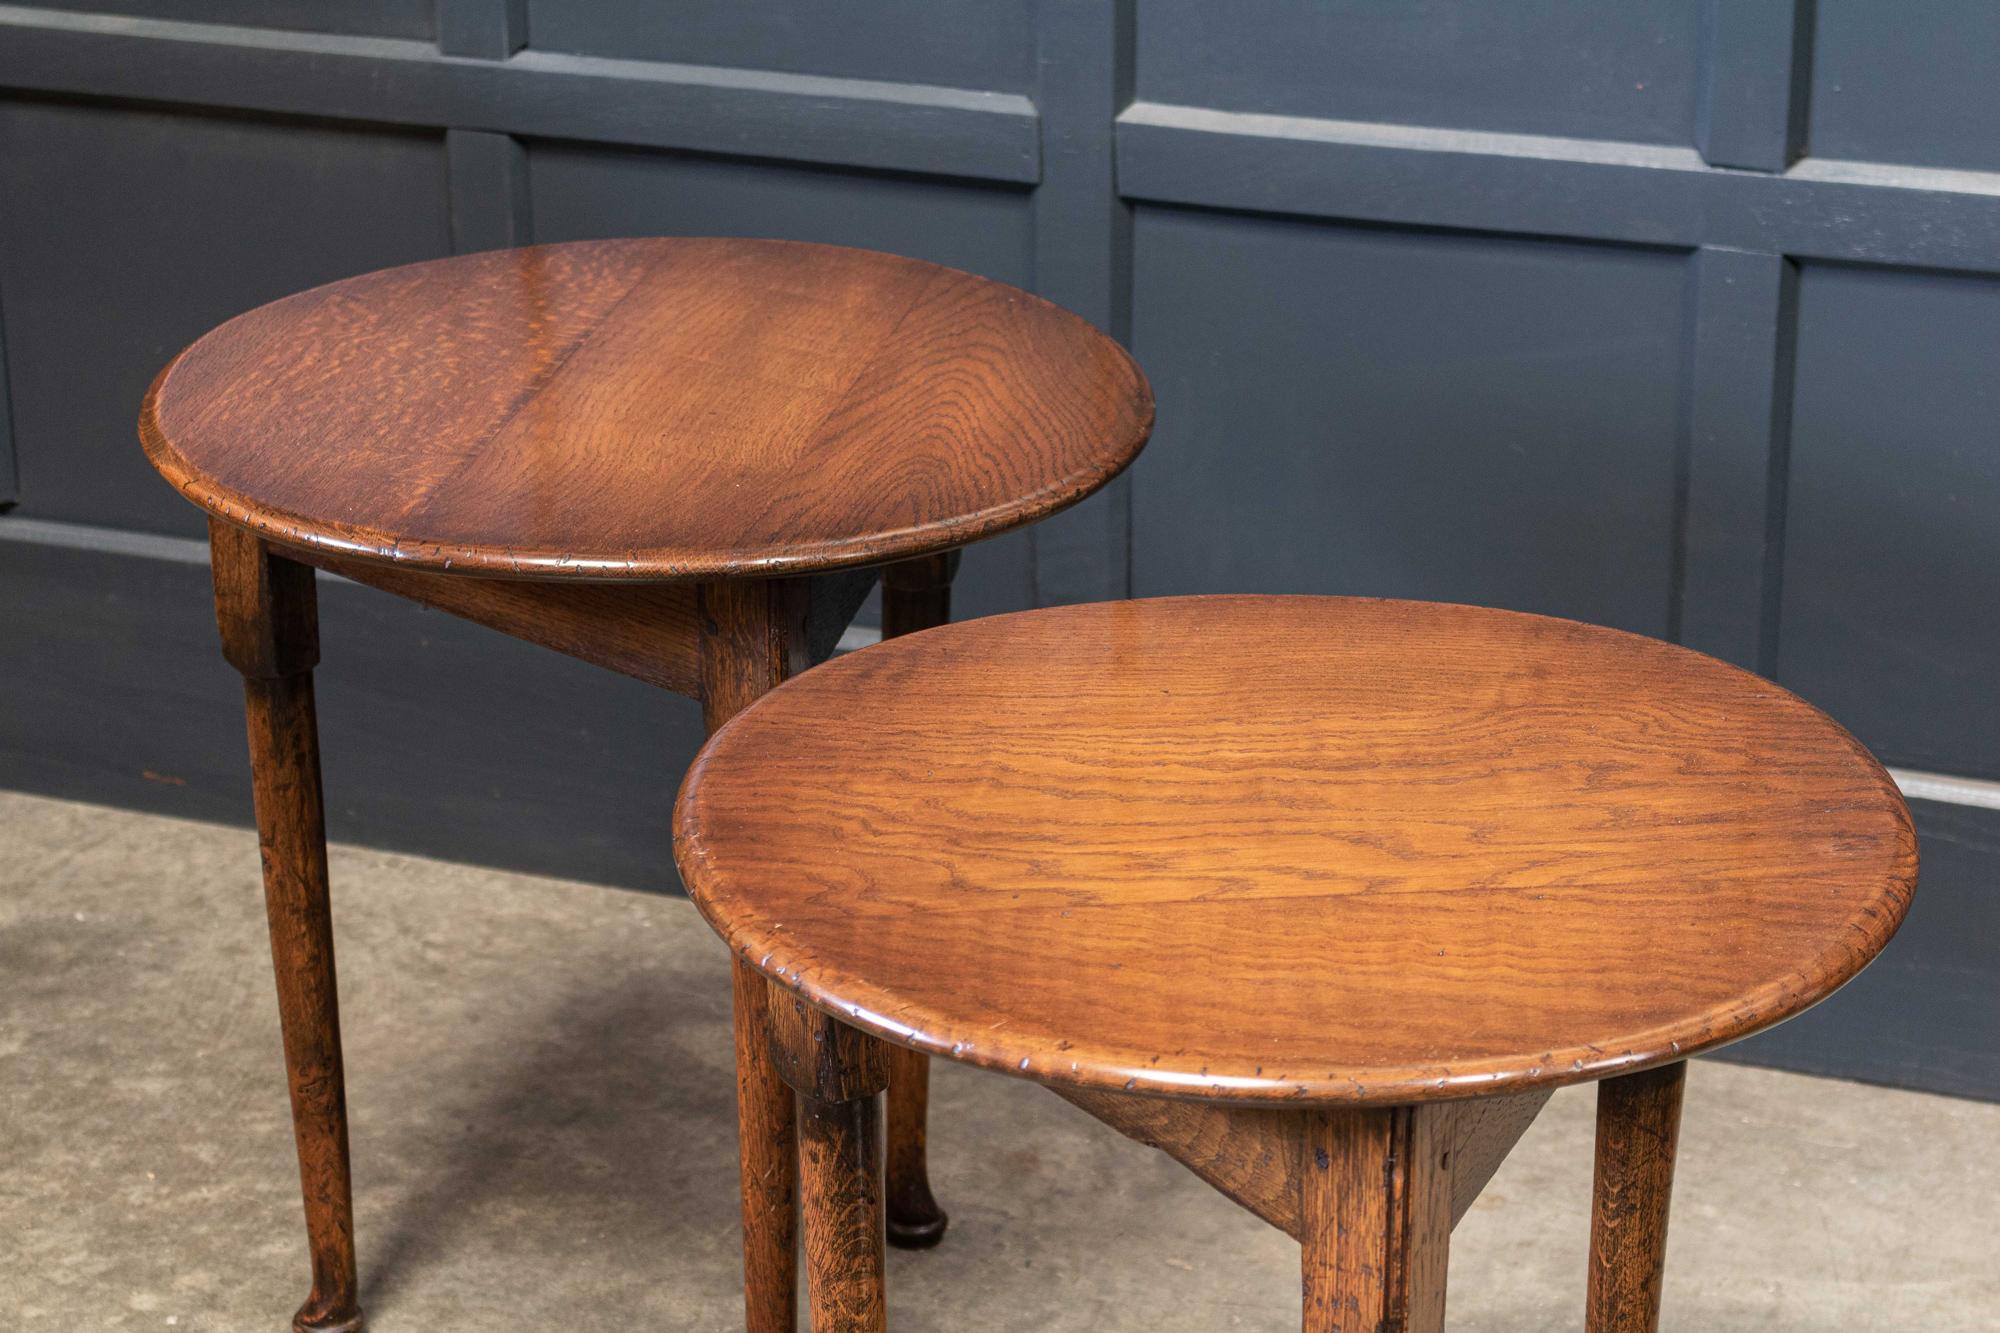 Circa 1840.

19thC pair of oak cricket / tavern tables, lovely patination and colour with pegged tapered legs on pad feet.

Price is for the pair.

Measures: W 50 x D 50 x H 58 cm


sku 671.